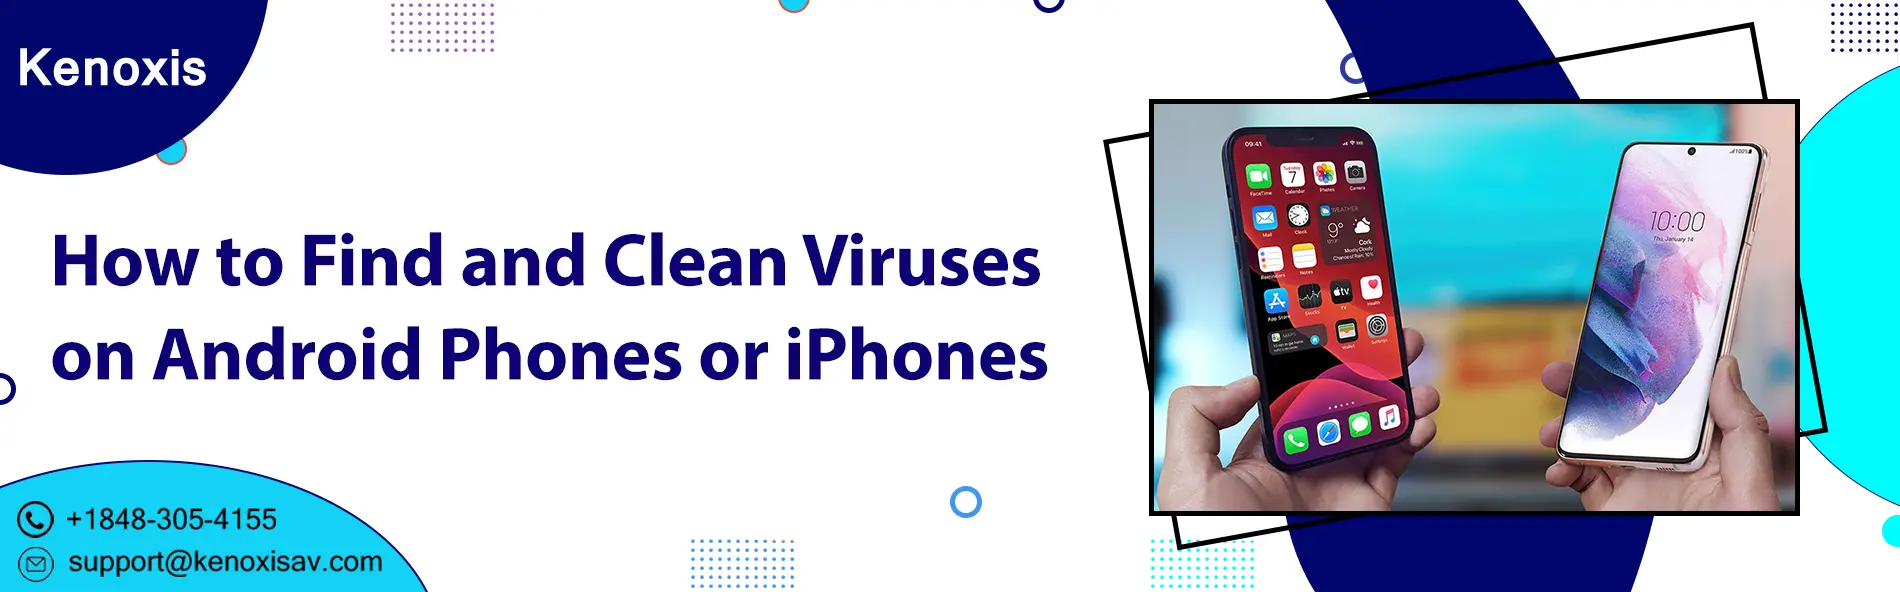 How to Find and Clean Viruses on Android Phones or iPhones